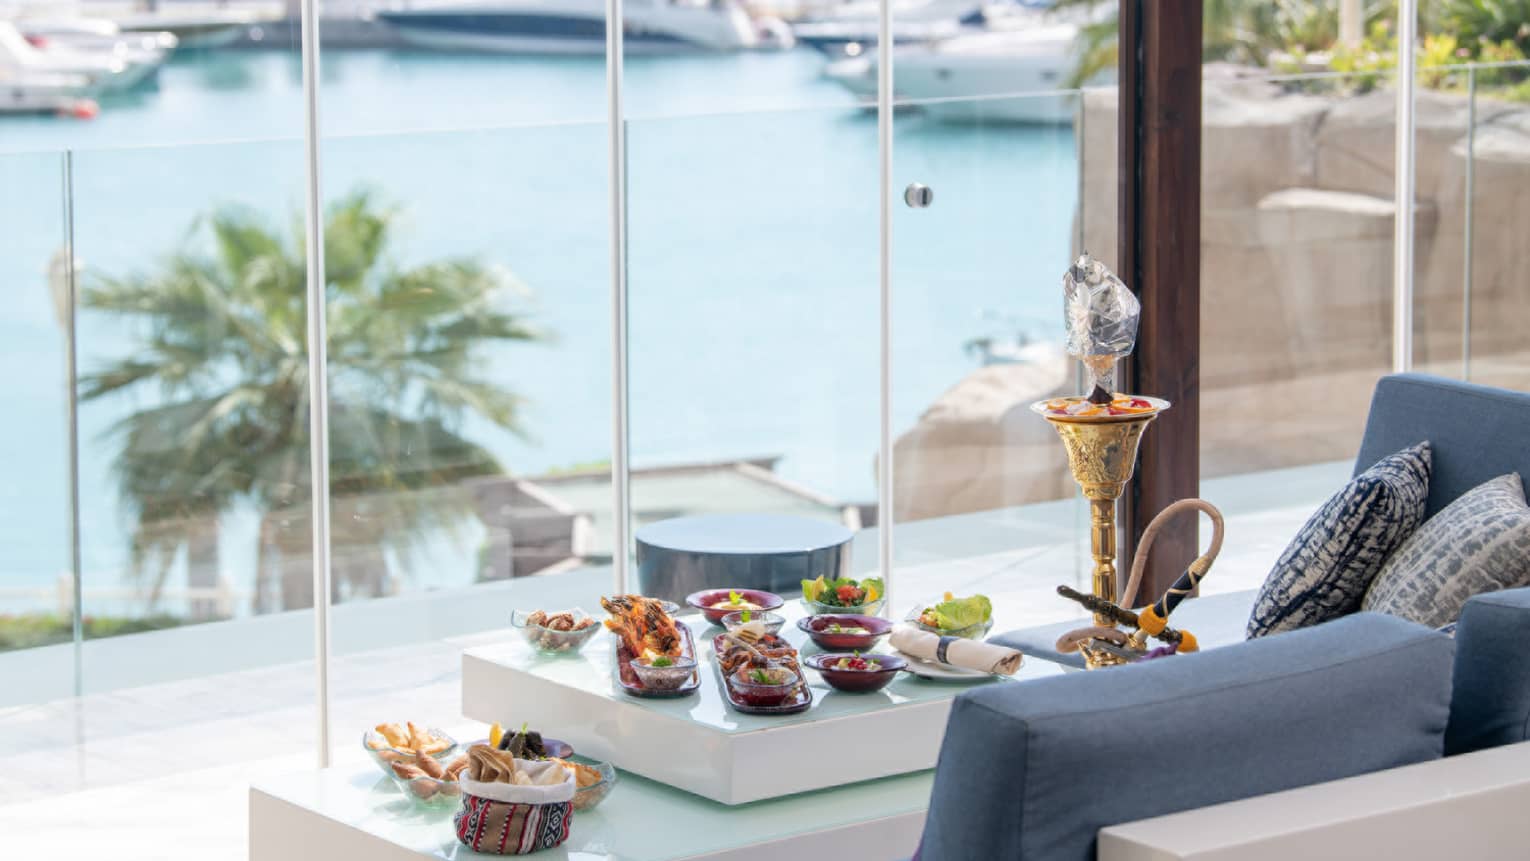 View of the marina through floor-to-ceiling windows at The Terrace, shisha and canap�s on table in front of blue sofa lounge